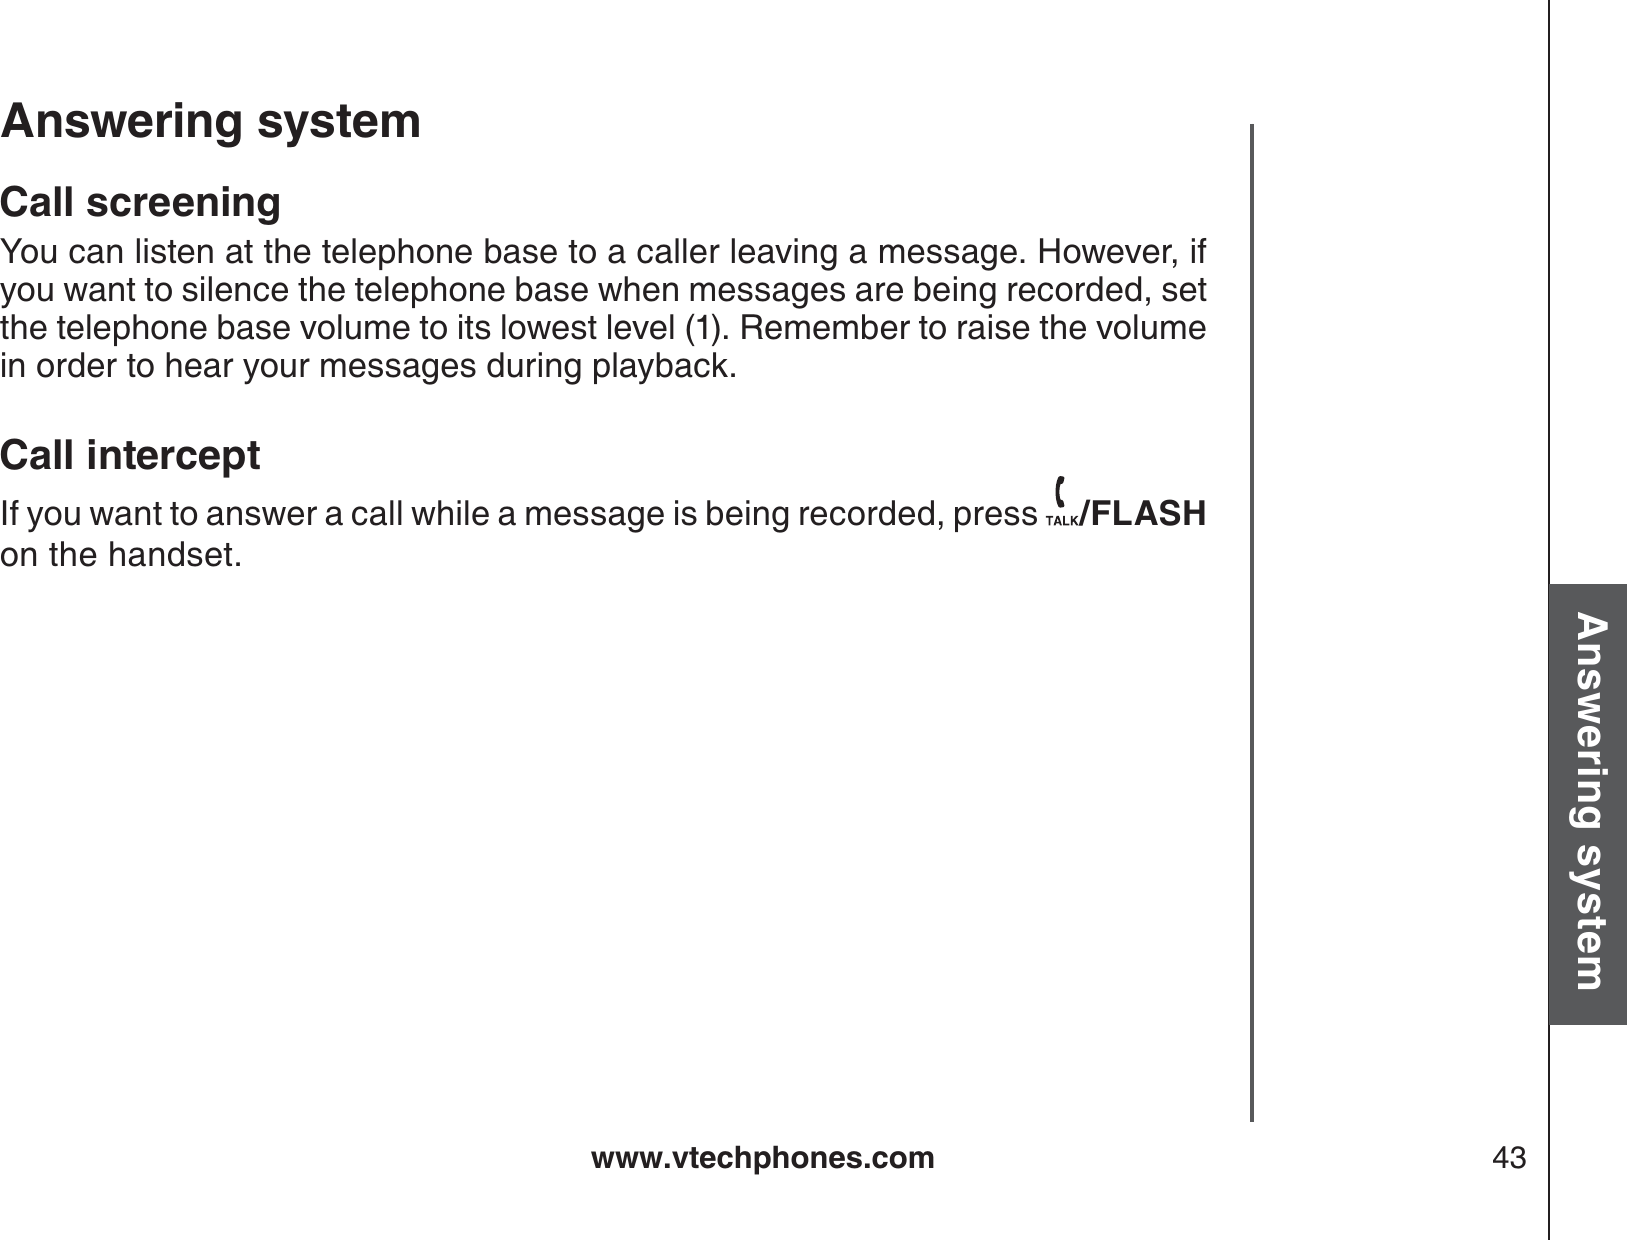 www.vtechphones.com 43Basic operationAnswering systemAnswering system Call screeningYou can listen at the telephone base to a caller leaving a message. However, ifyou want to silence the telephone base when messages are being recorded, set the telephone base volume to its lowest level (1). Remember to raise the volume in order to hear your messages during playback.Call interceptIf you want to answer a call while a message is being recorded, press  /FLASHon the handset.